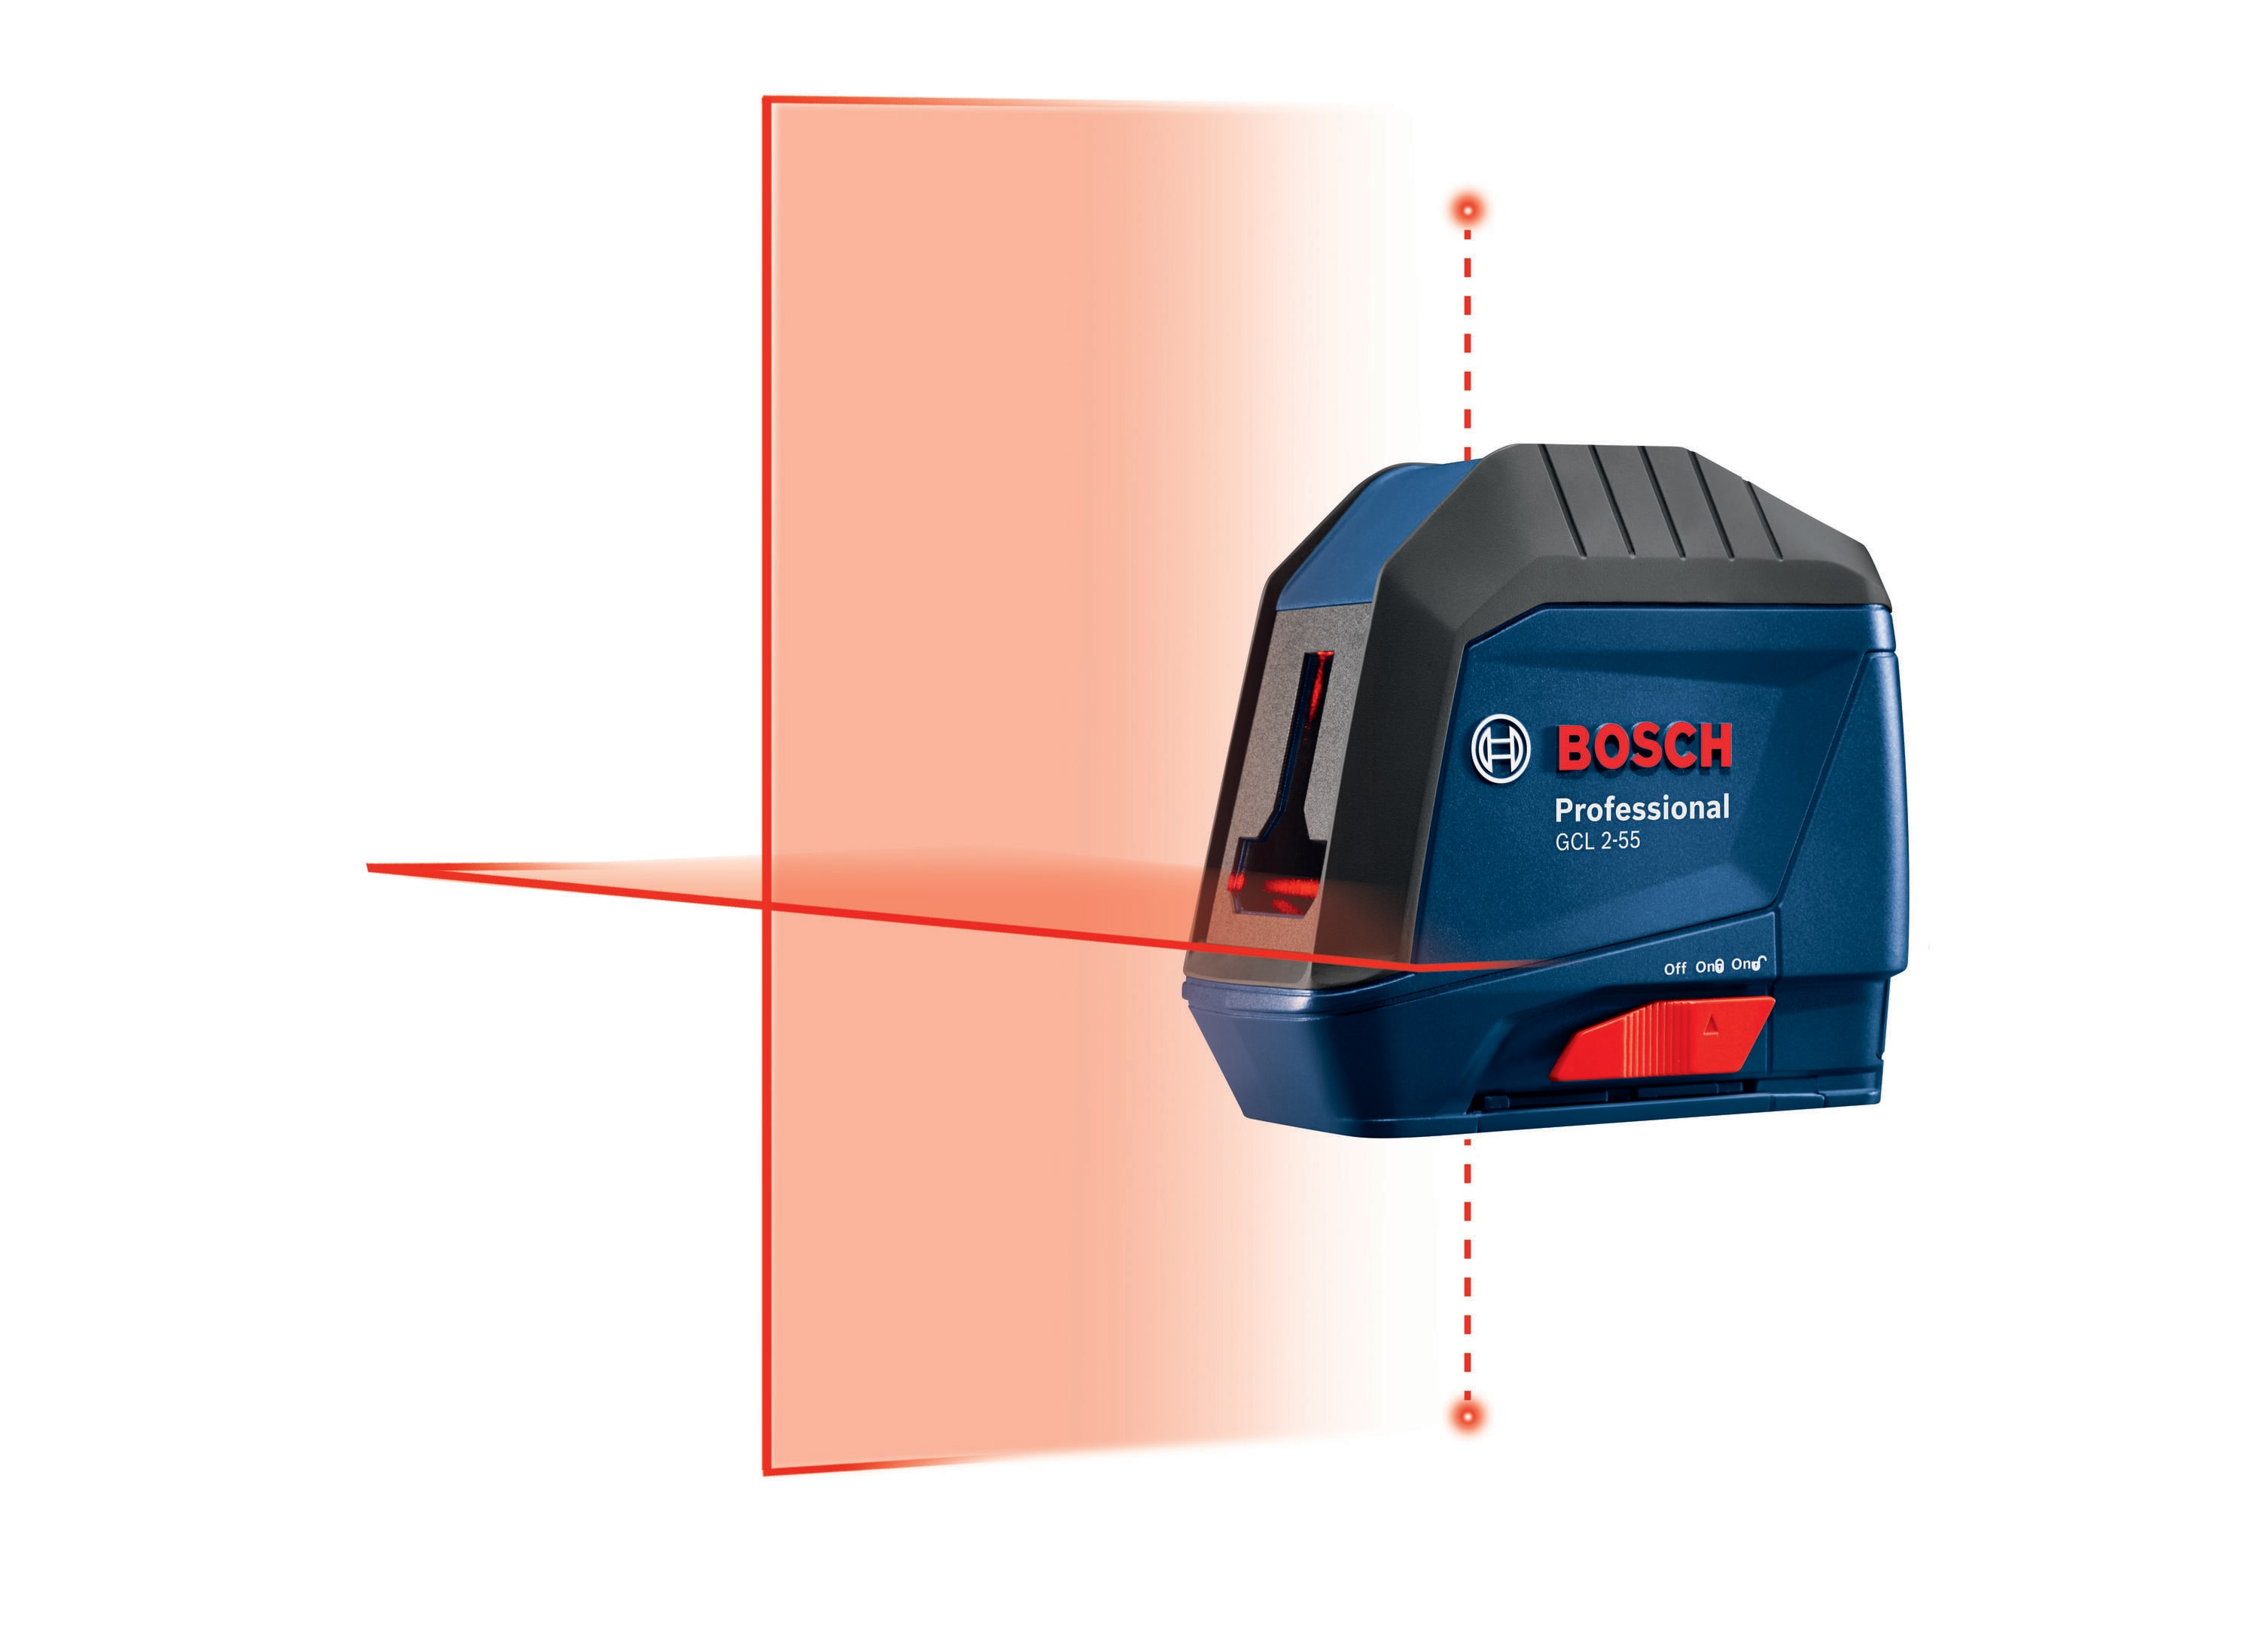 Bosch 125 ft. Green 5-Point Self-Leveling Laser with VisiMax